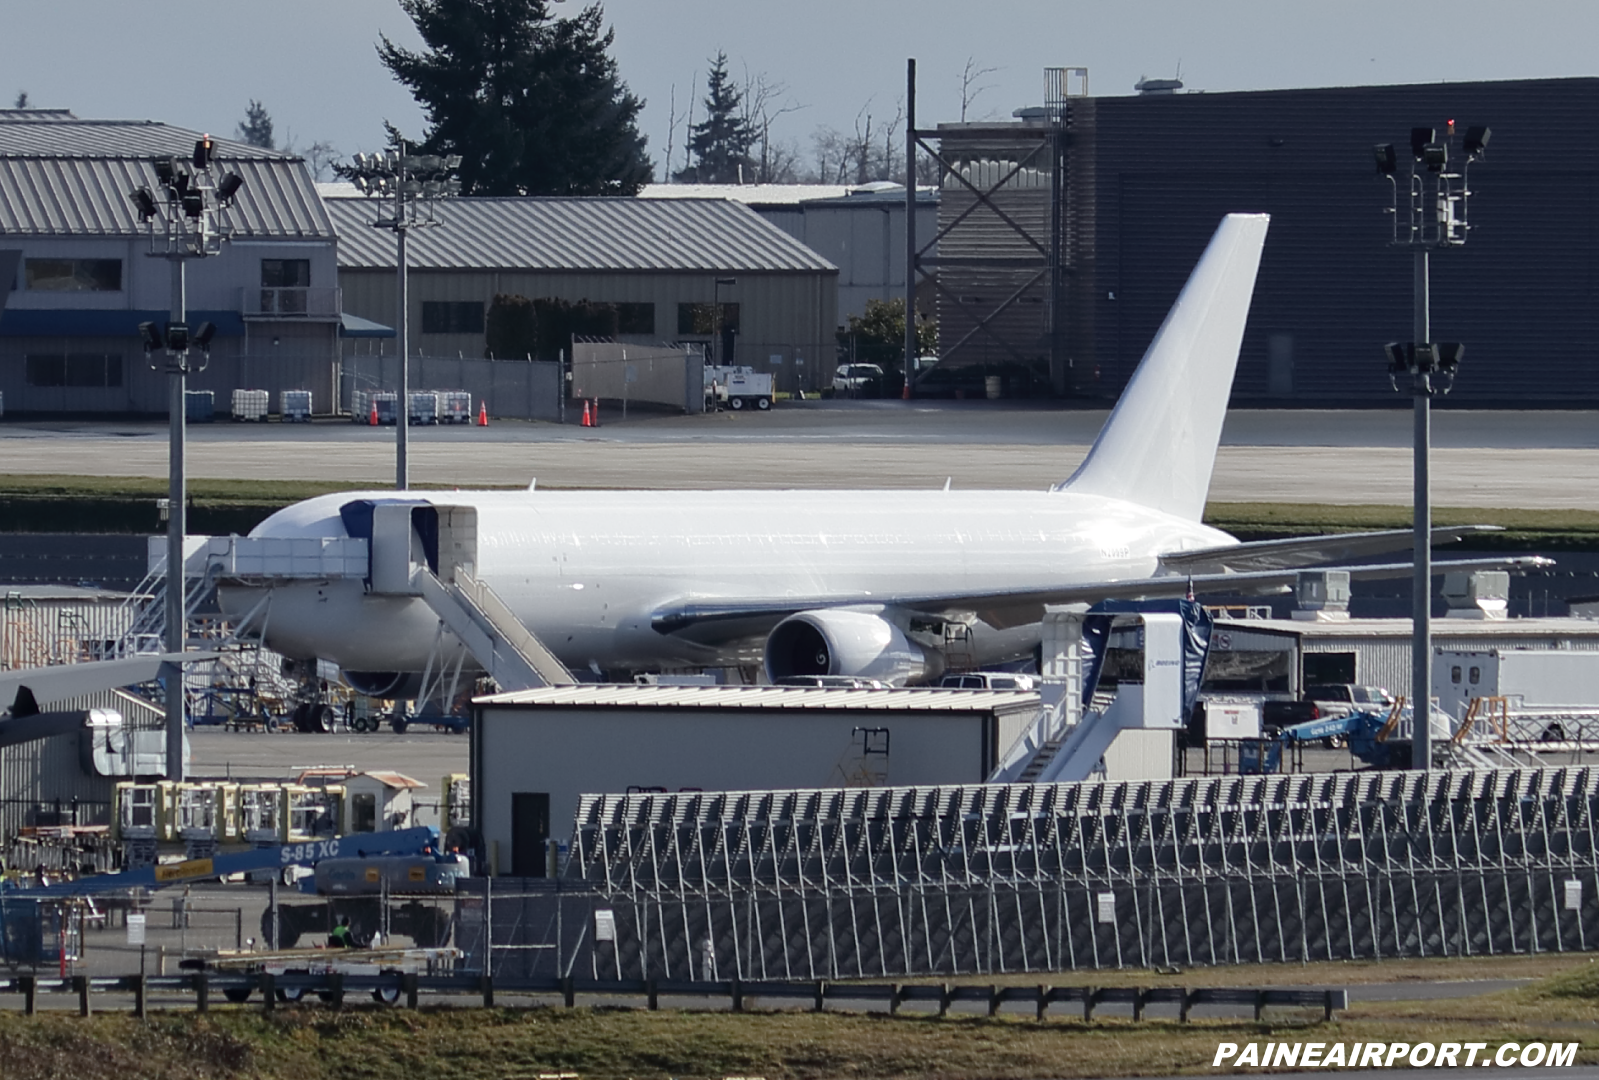 Longhao Airlines 767 at KPAE Paine Field